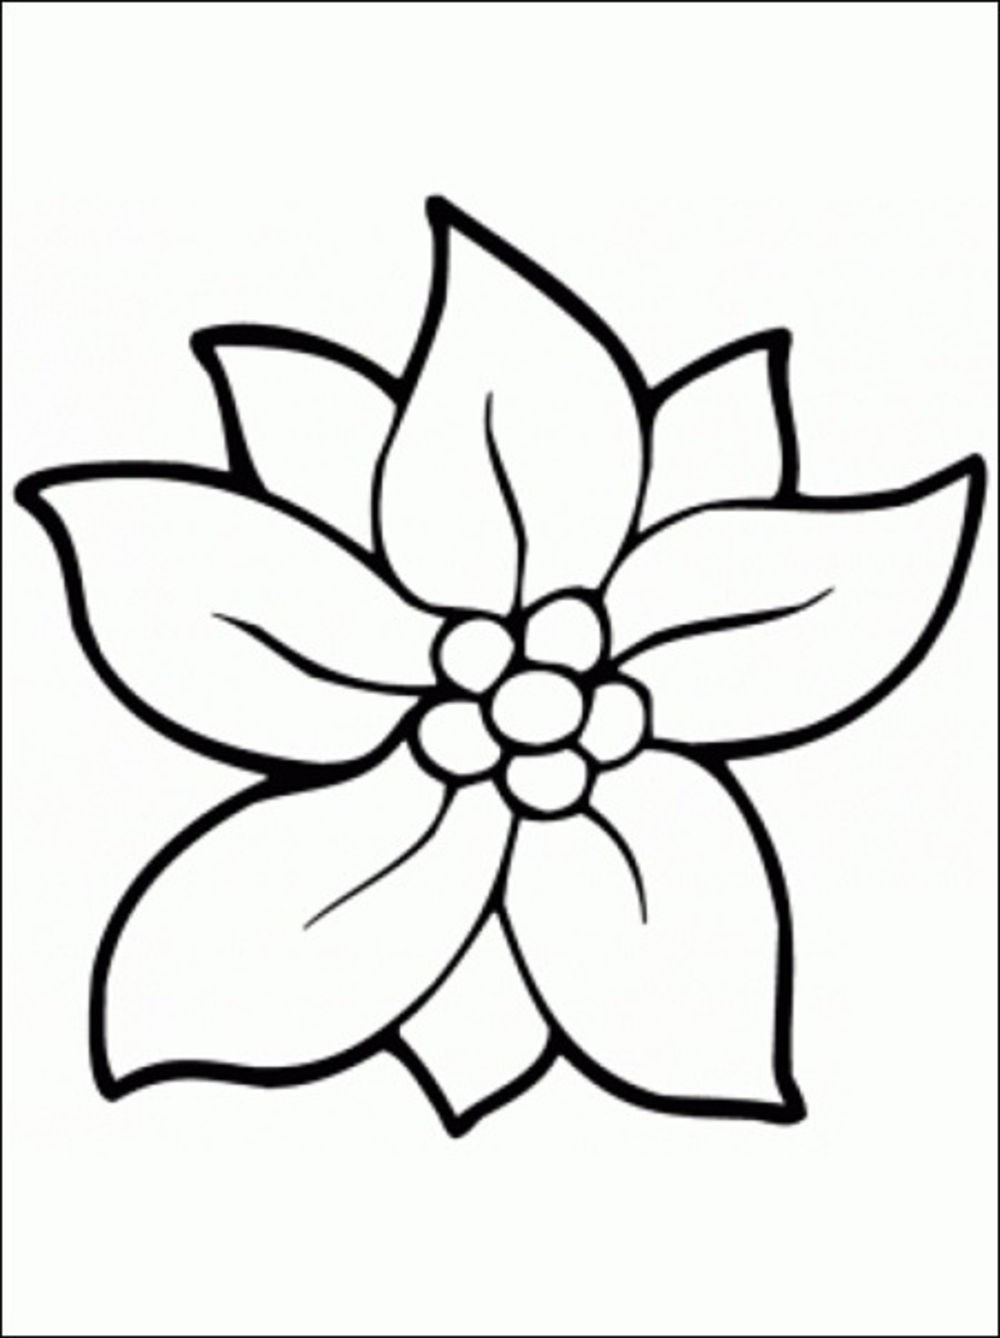 May Flowers Coloring Pages
 Flower Coloring Pages coloringsuite